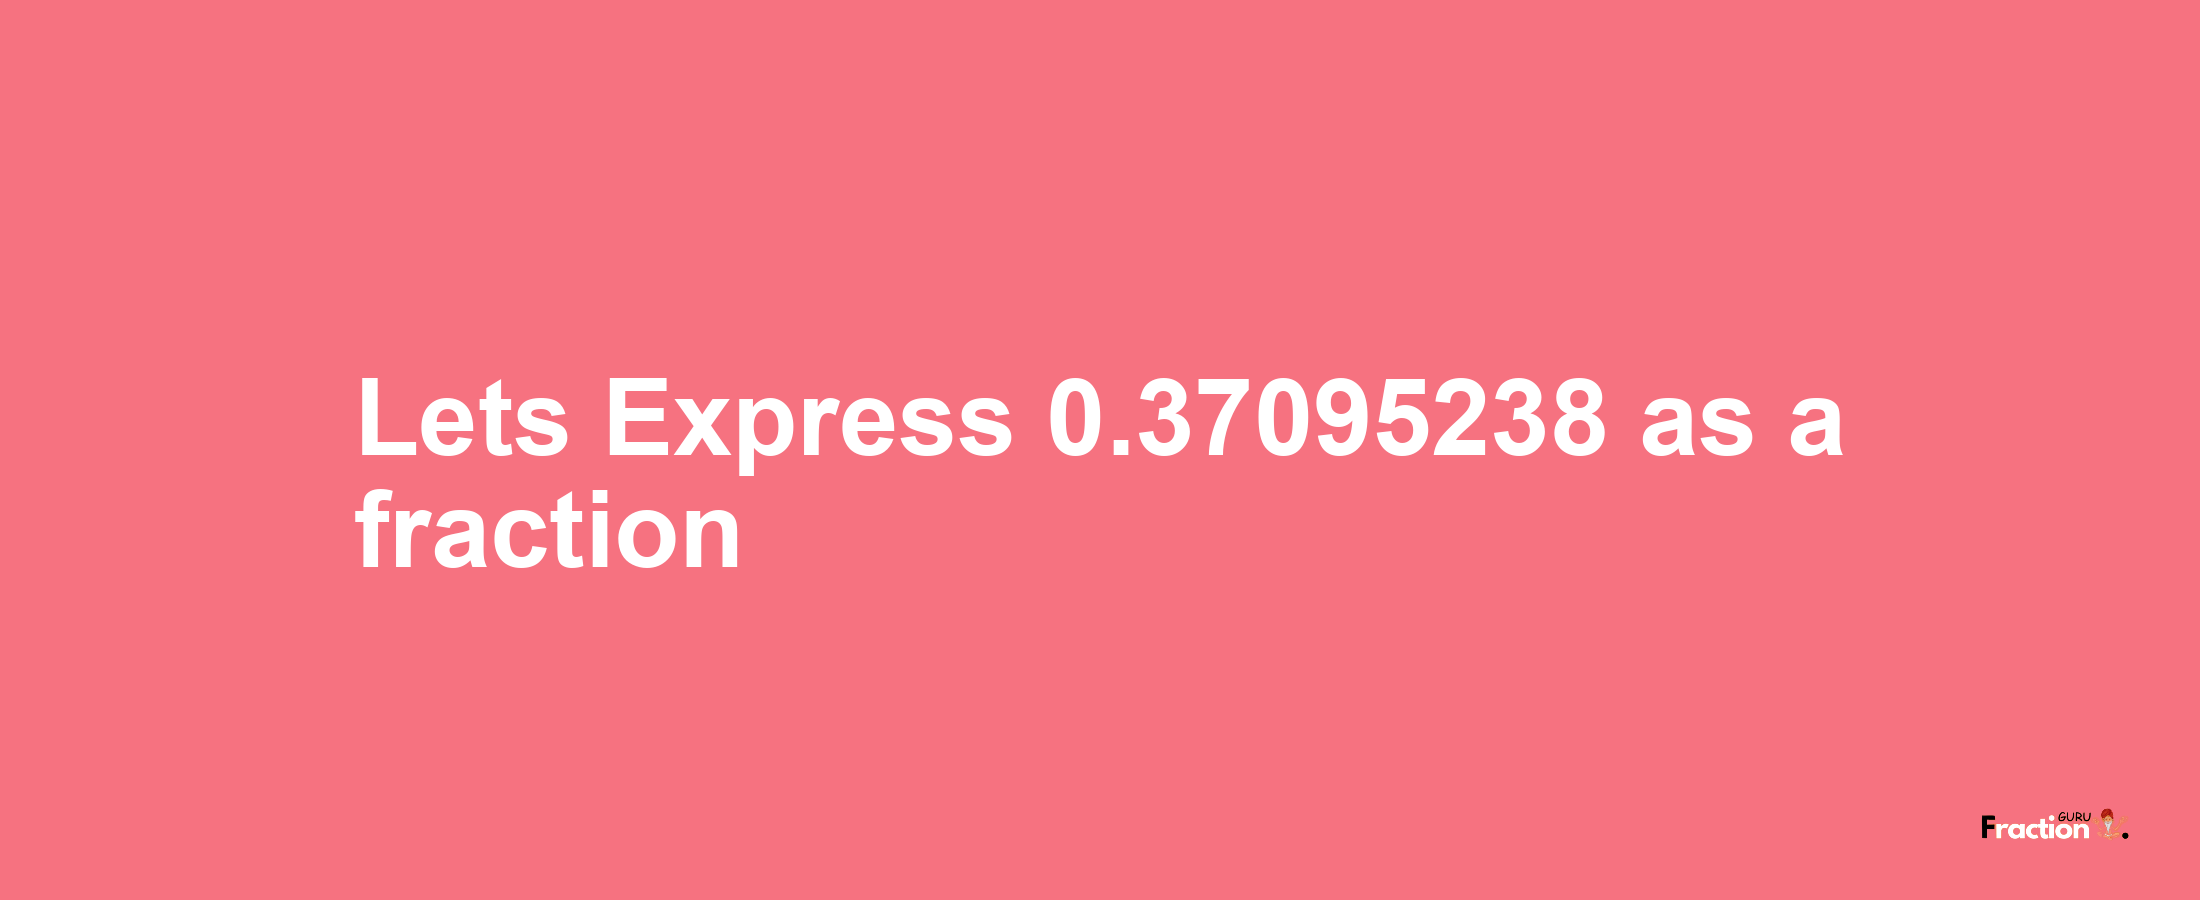 Lets Express 0.37095238 as afraction